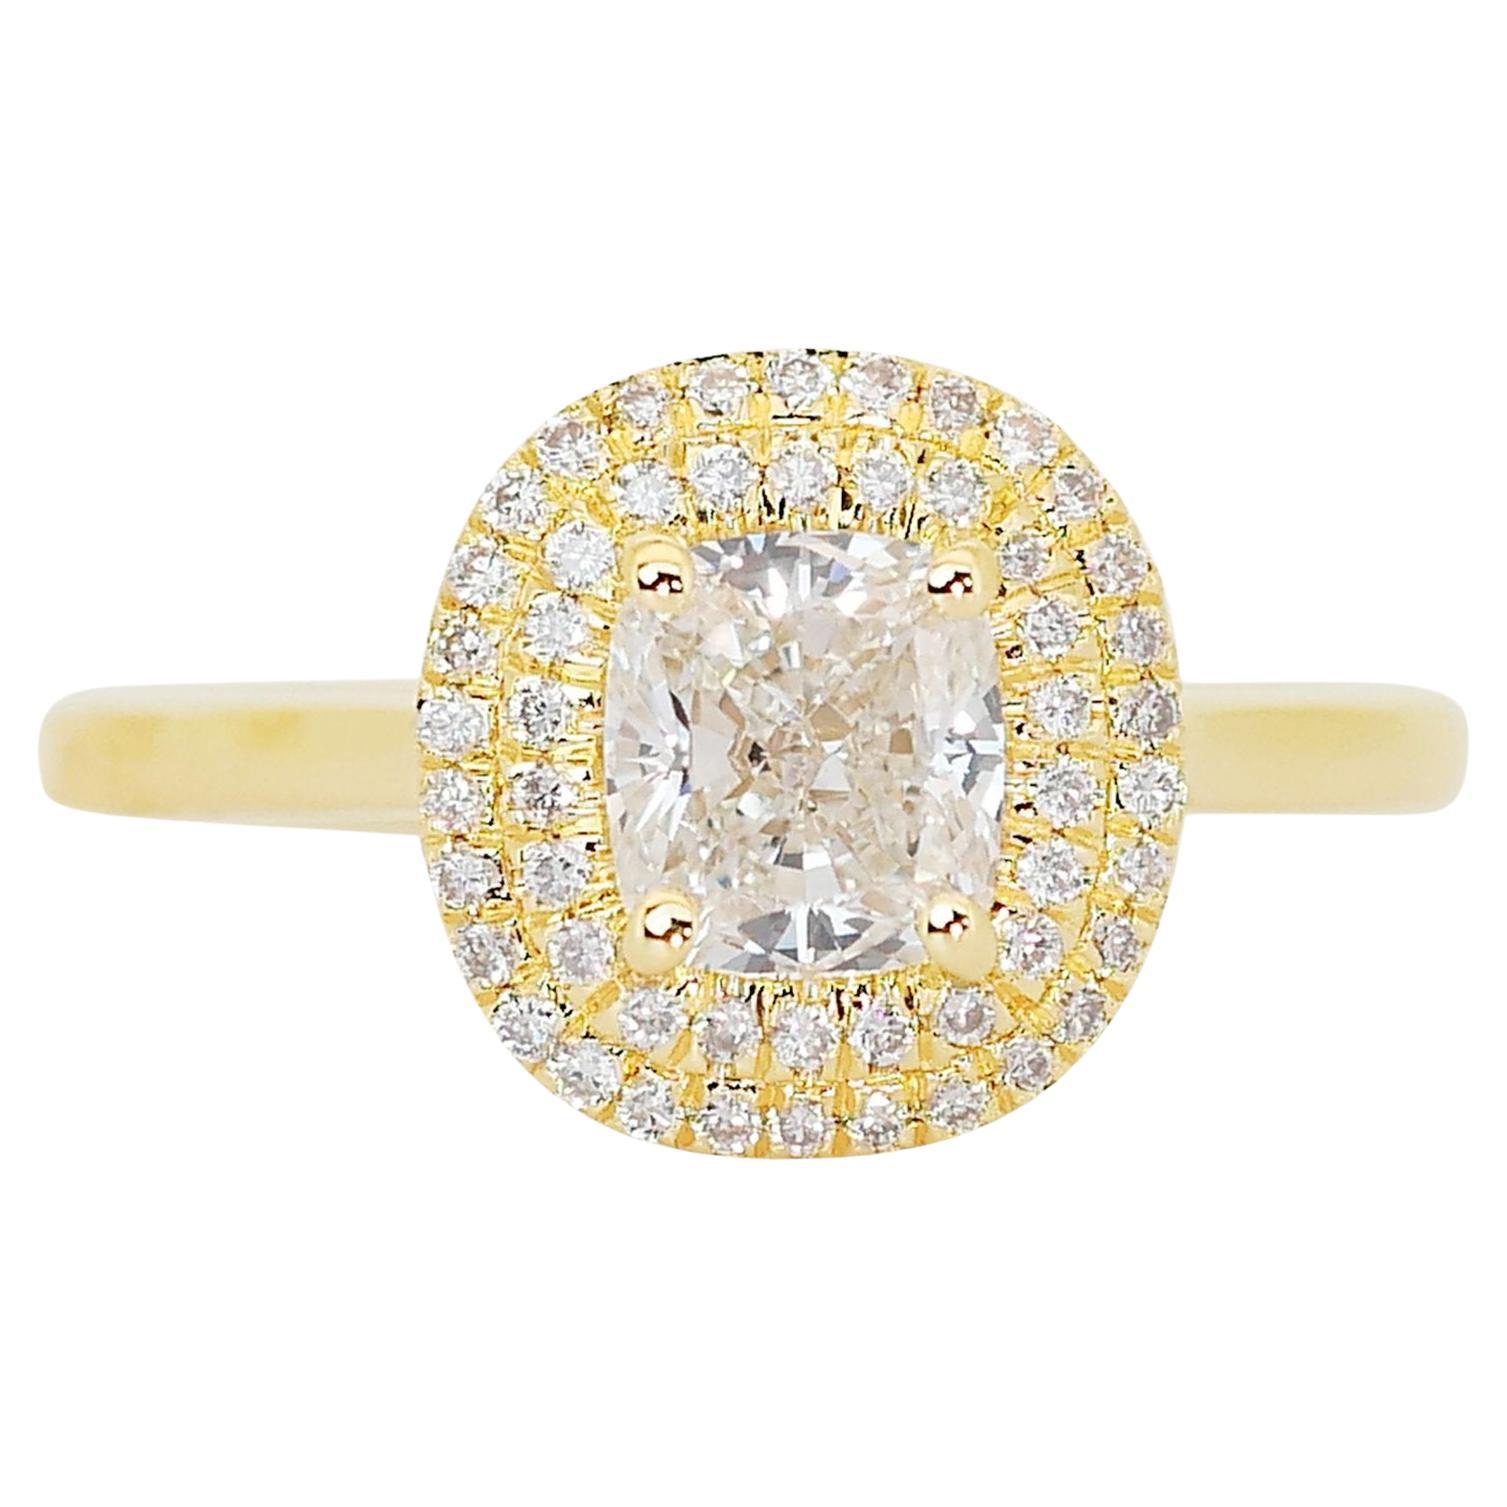 Majestic 1.78ct Diamond Halo Ring in 18k Yellow Gold - GIA Certified For Sale